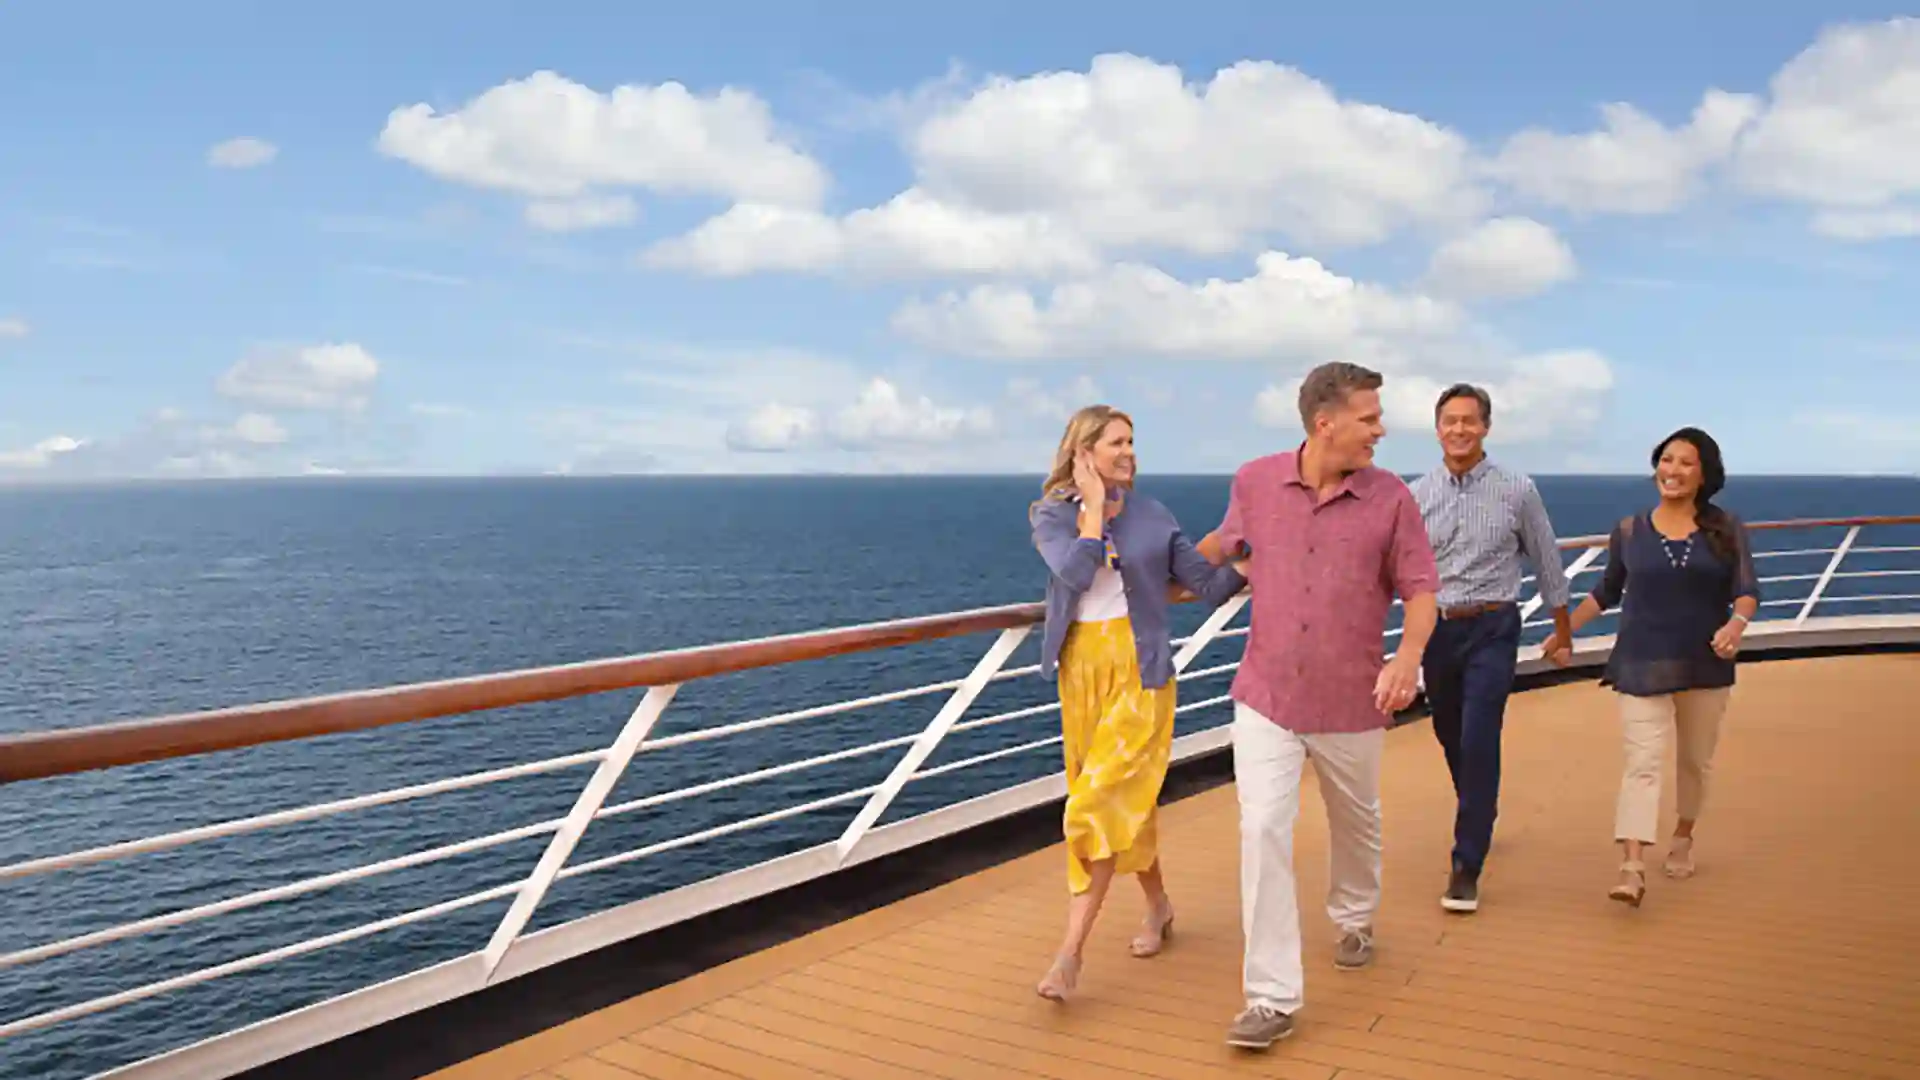 People walking on cruise ship deck with ocean in background.